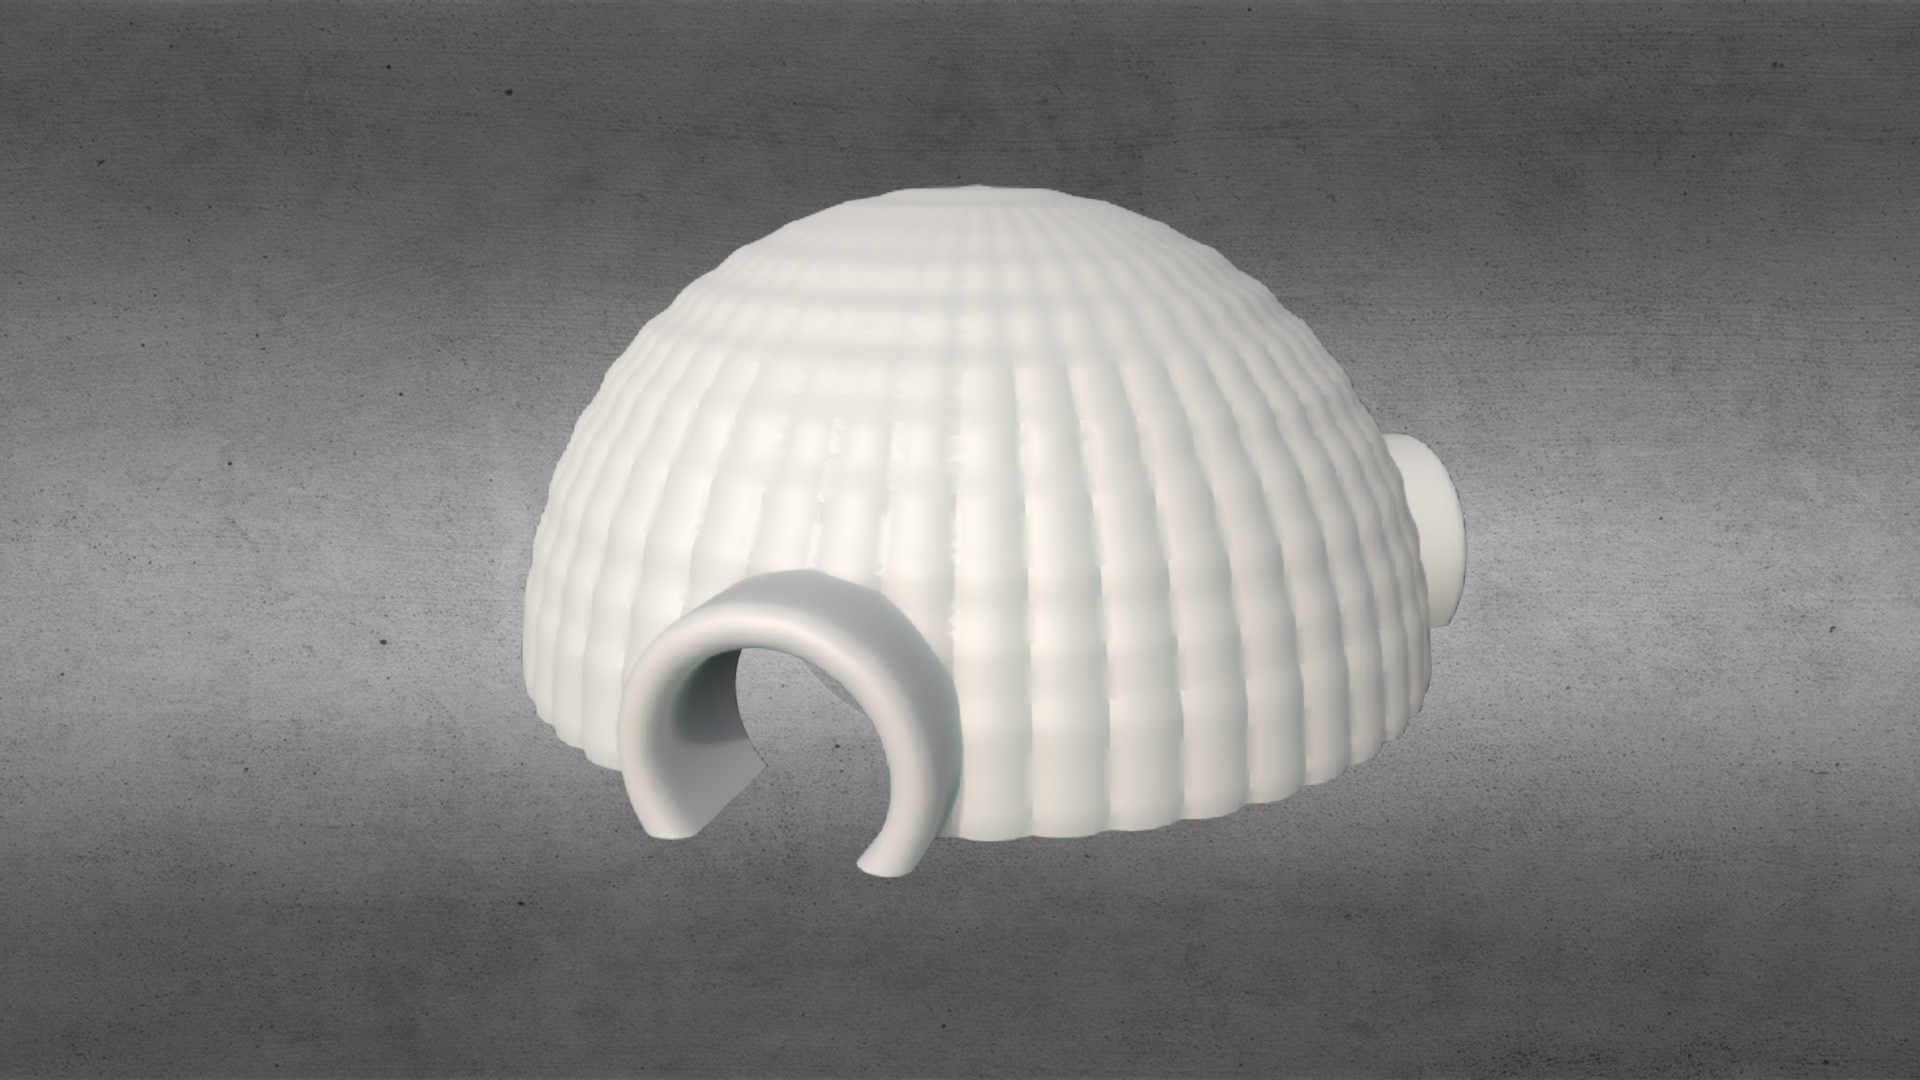 3D model 3D CAD Large Inflatable Dome (3D Printable) - This is a 3D model of the 3D CAD Large Inflatable Dome (3D Printable). The 3D model is about a white lamp shade.